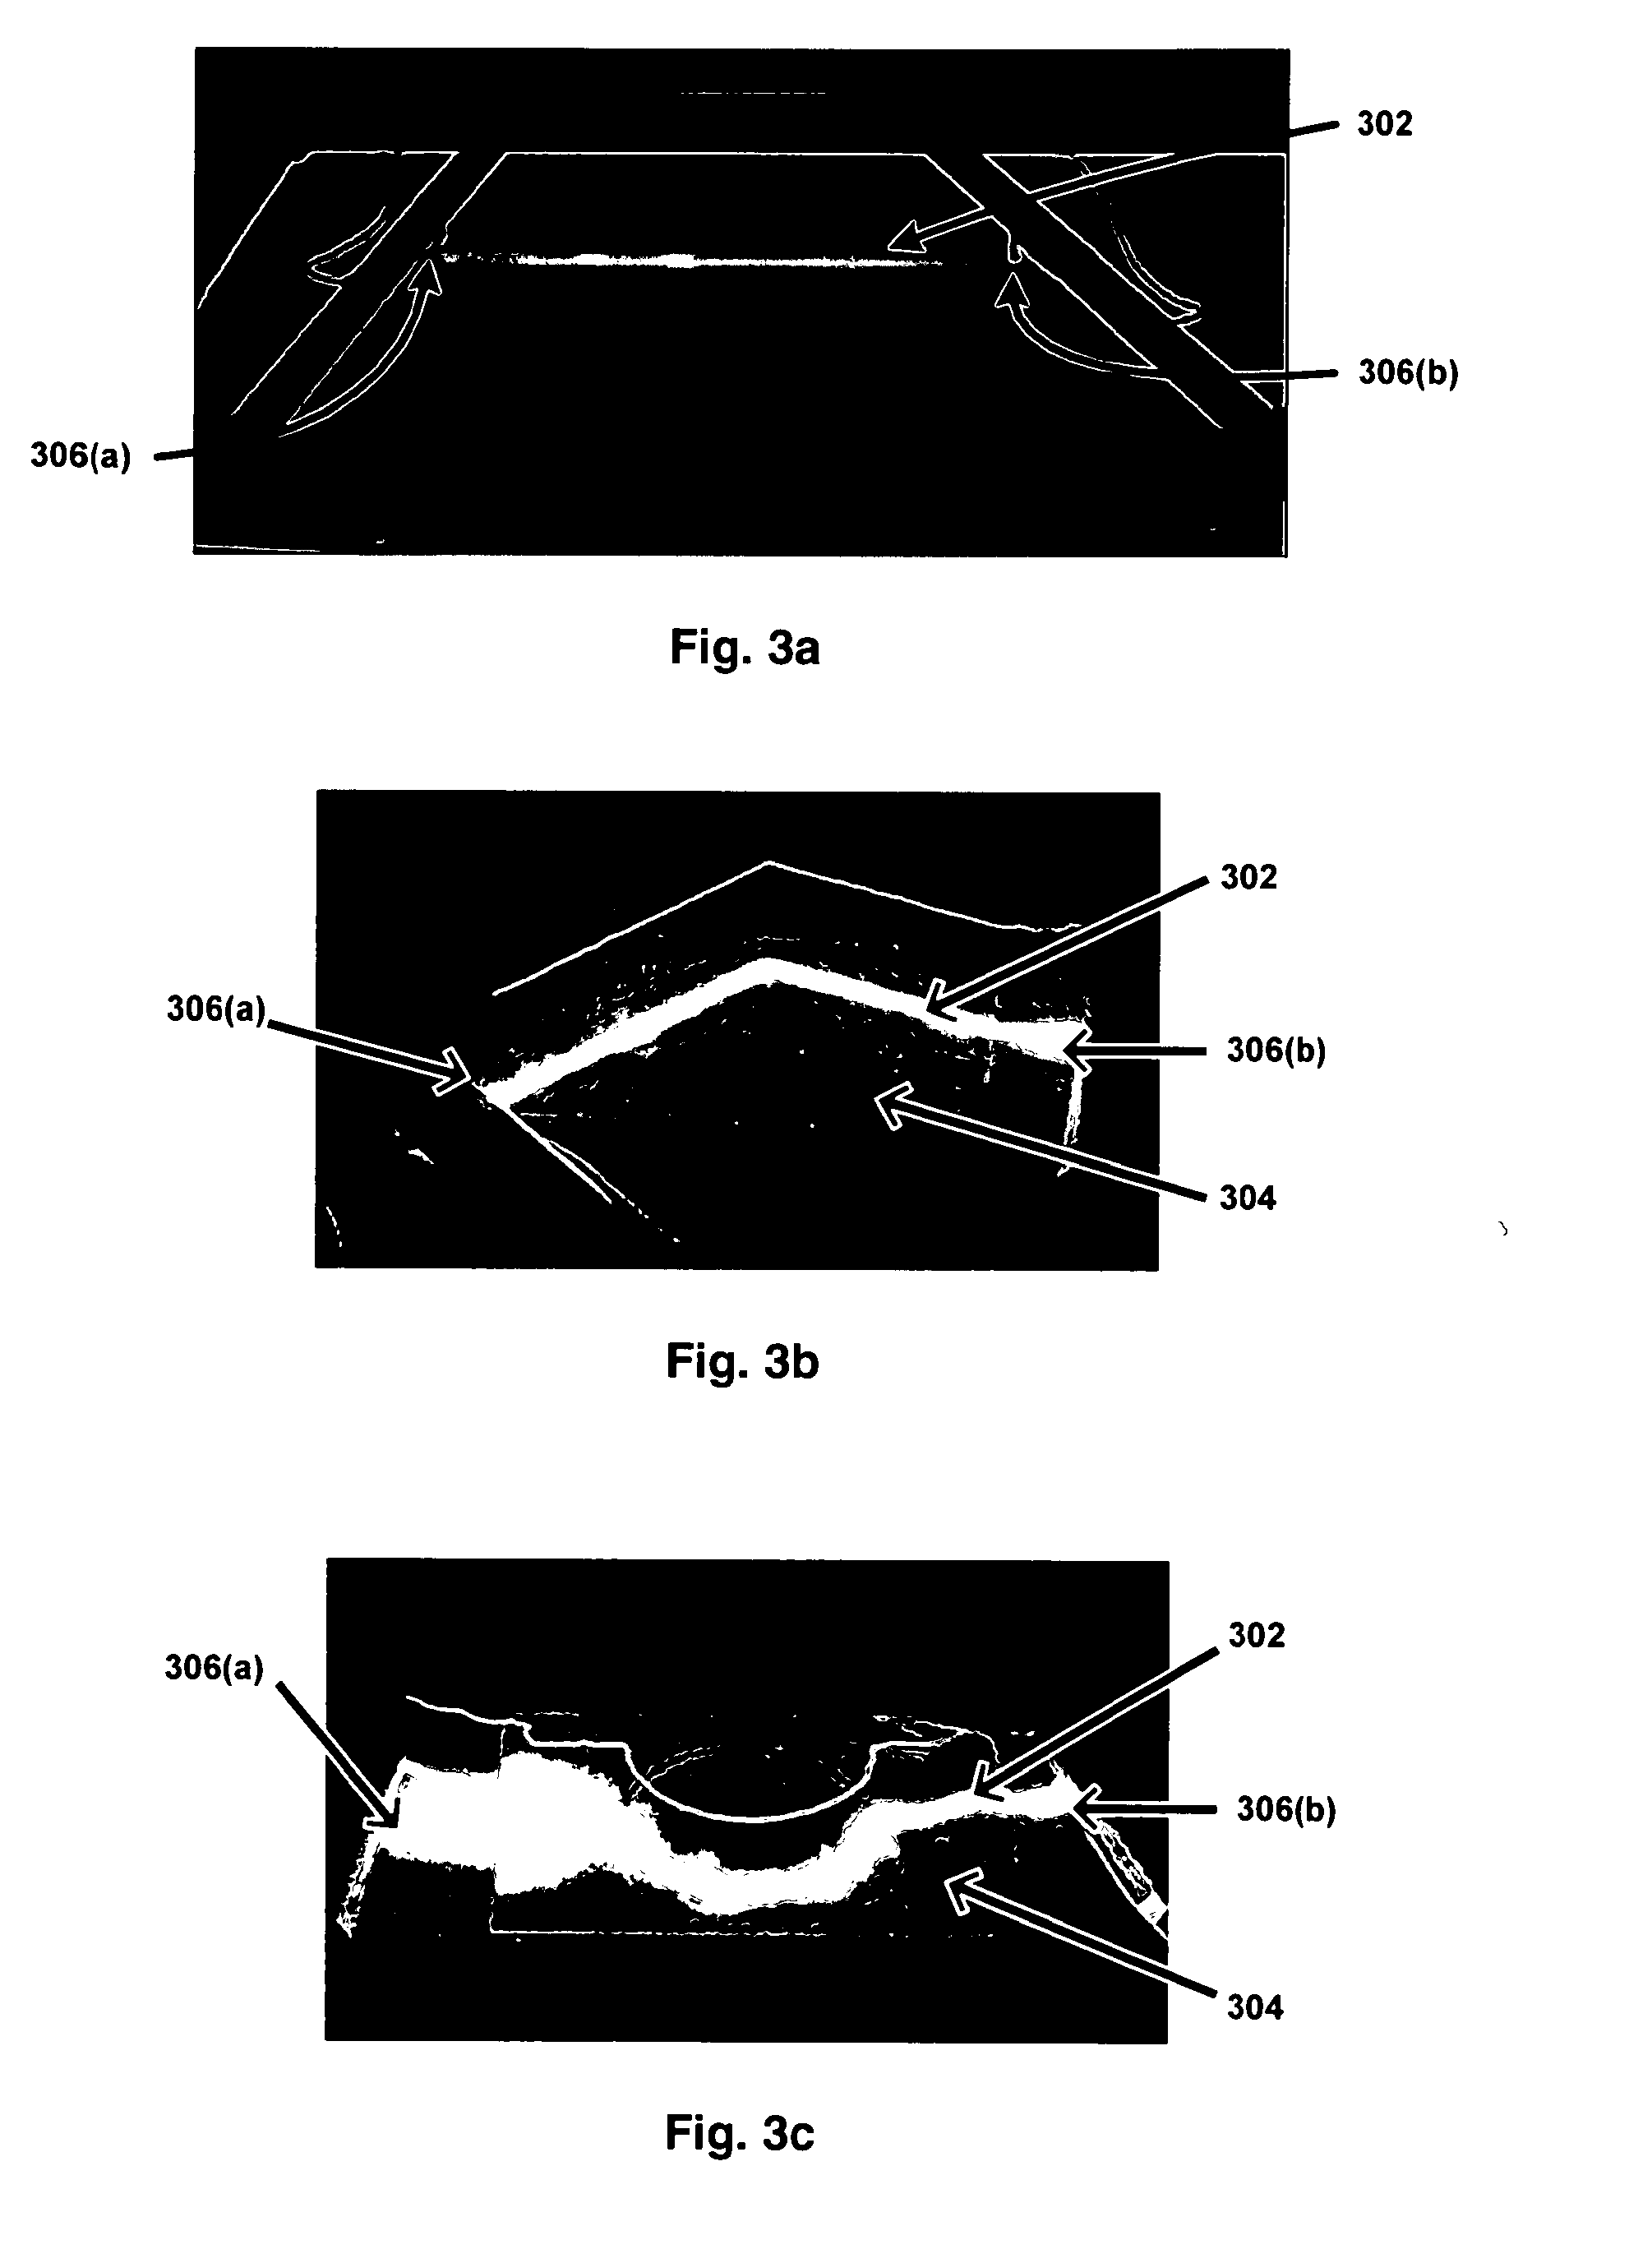 Energy- deposition sytems,eguipment and method for modifying and controling shock waves and supersonic flow